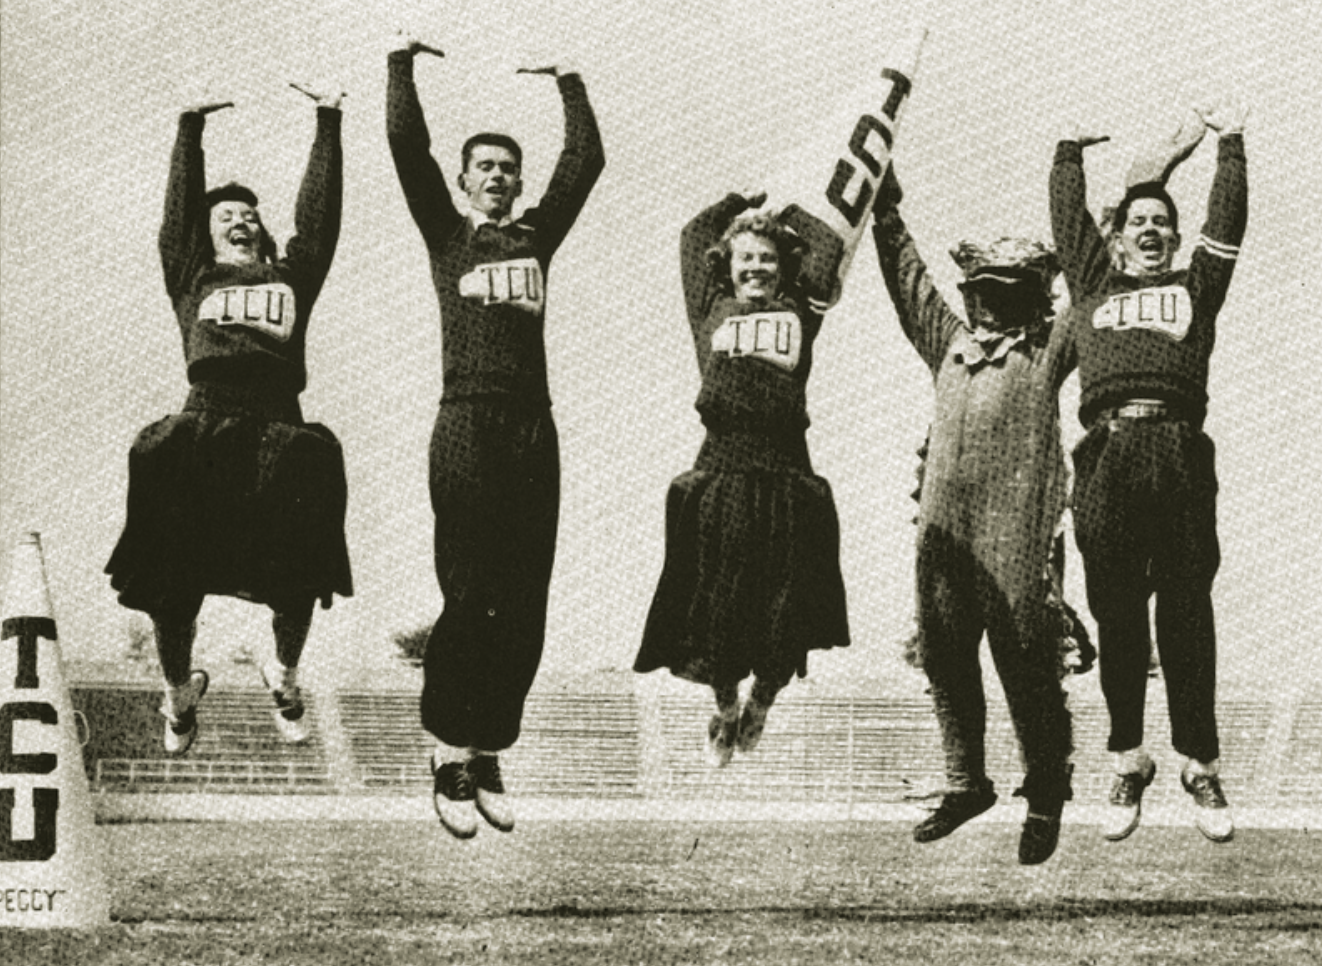 1953 photo of TCU cheerleaders in uniform and Addy the mascot jumping in the air.